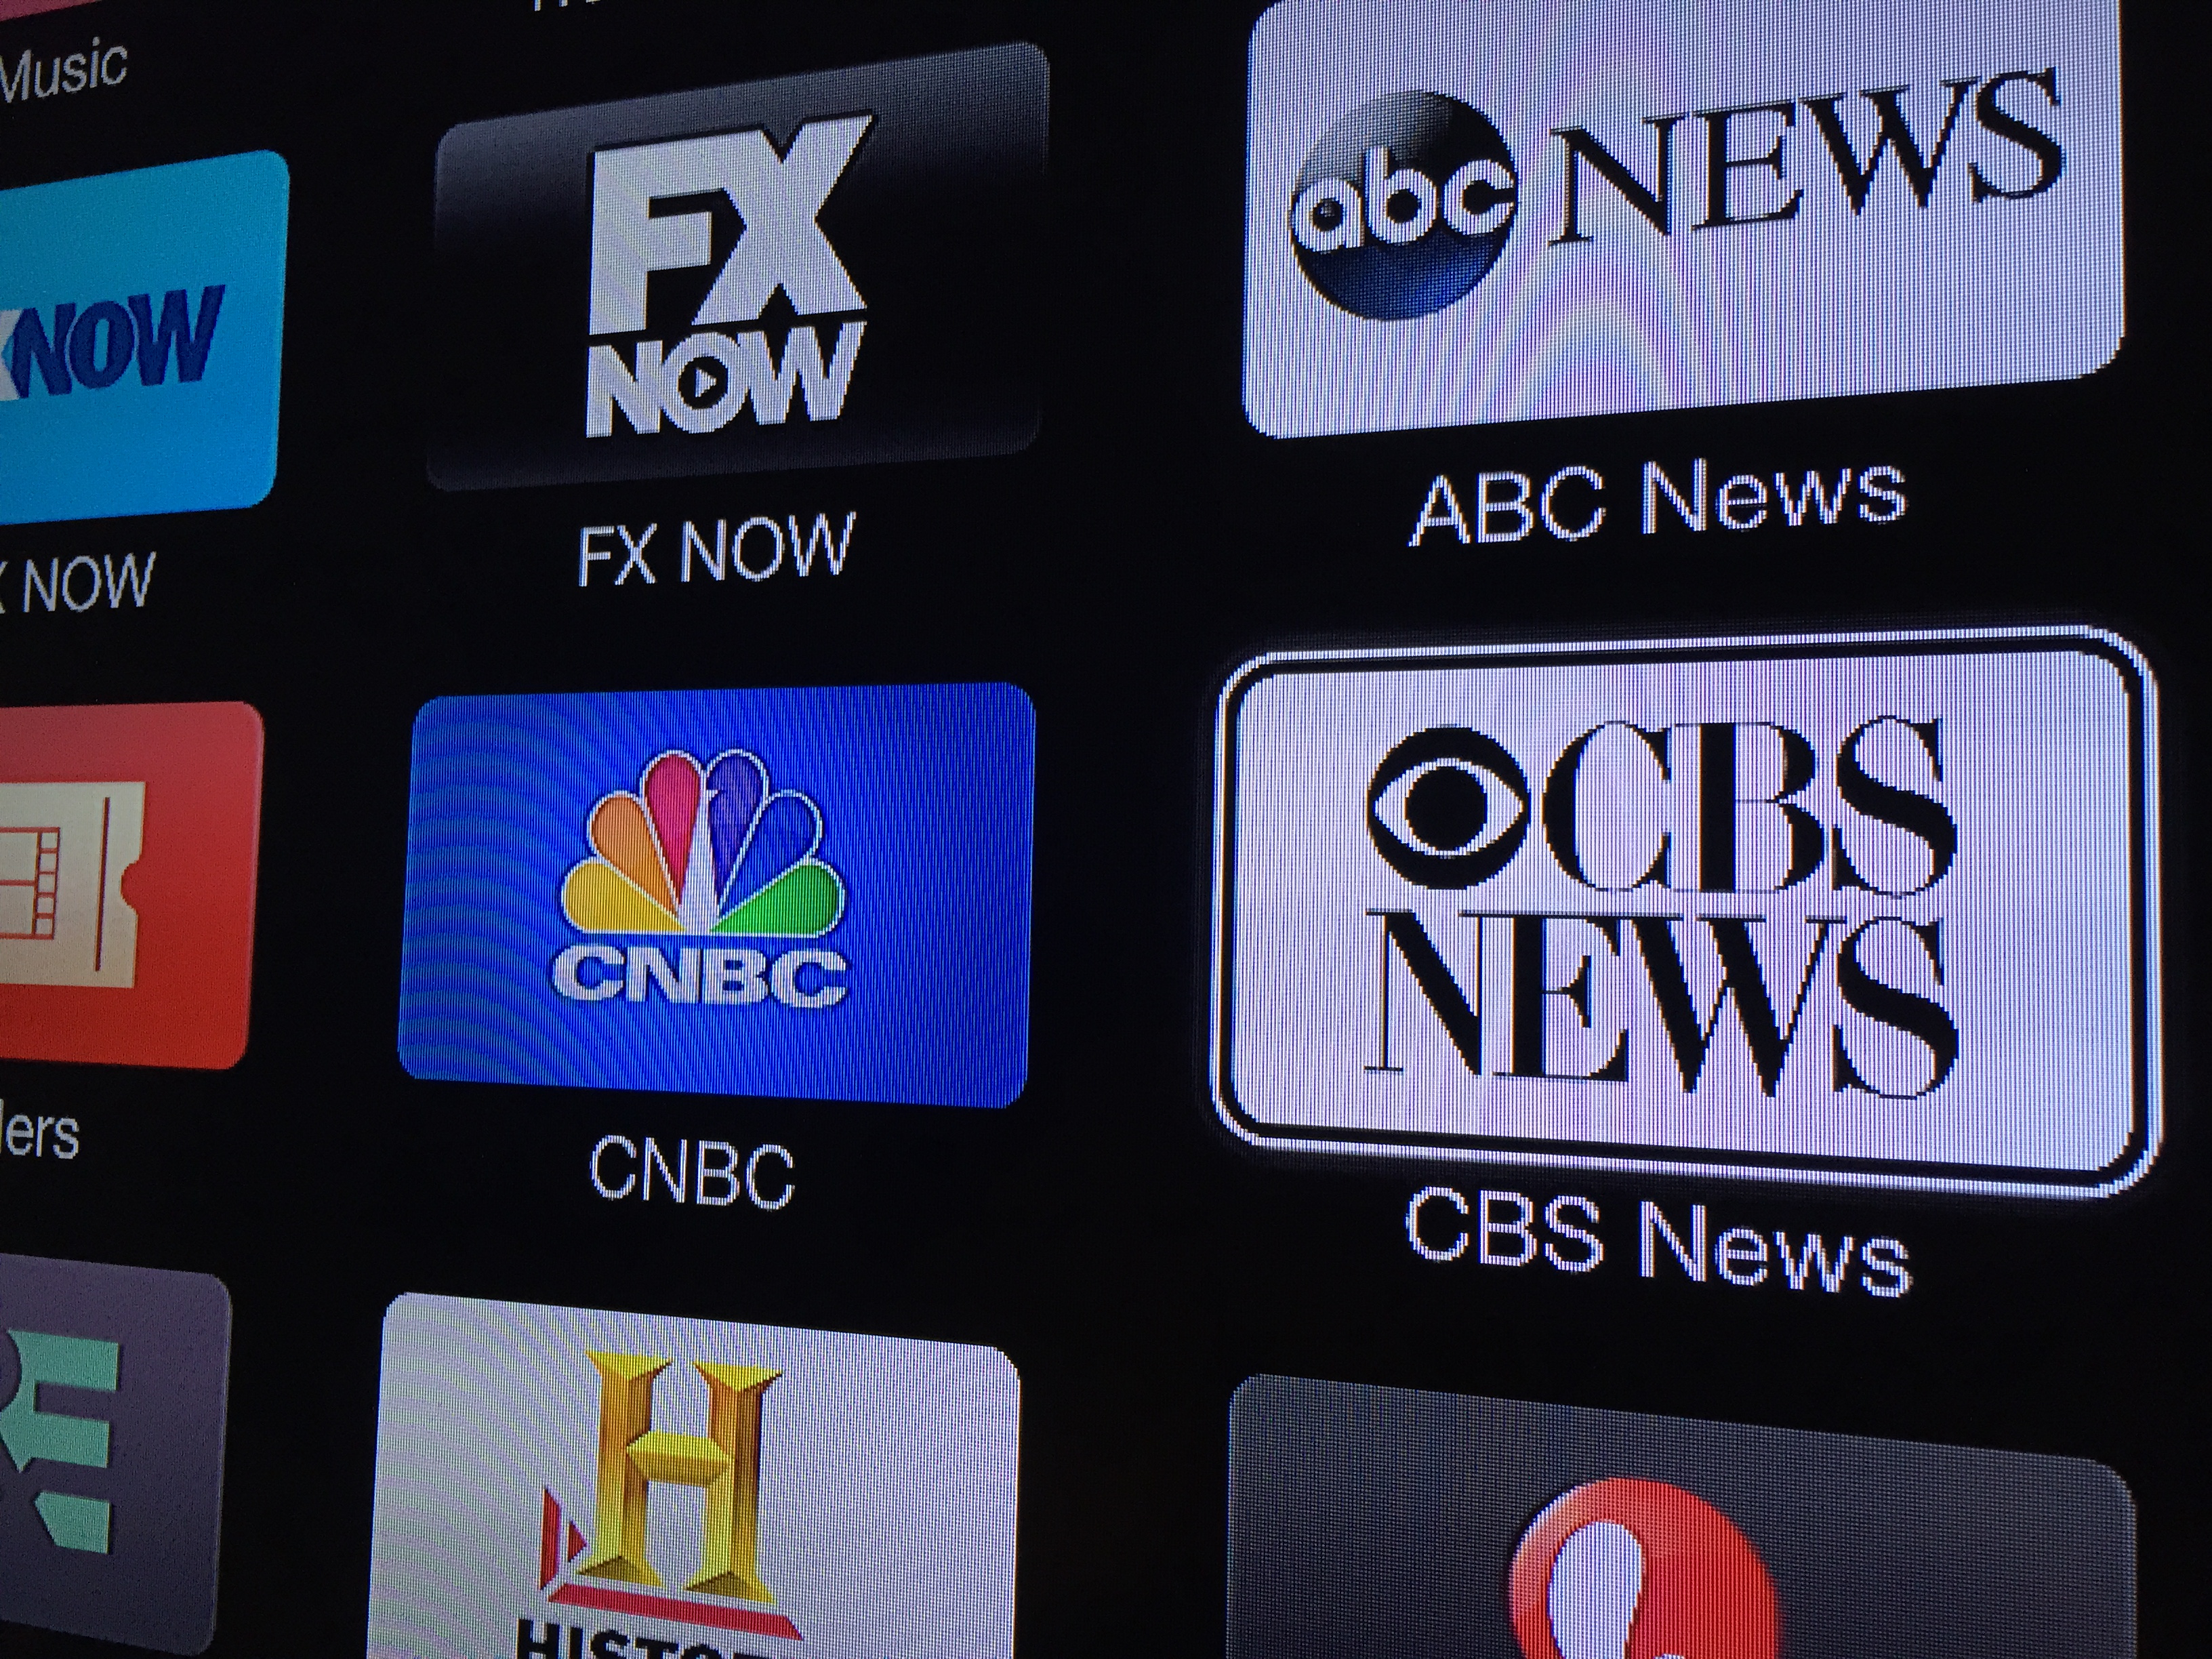 Apple TV updated with CBS News channel including free CBSN streaming